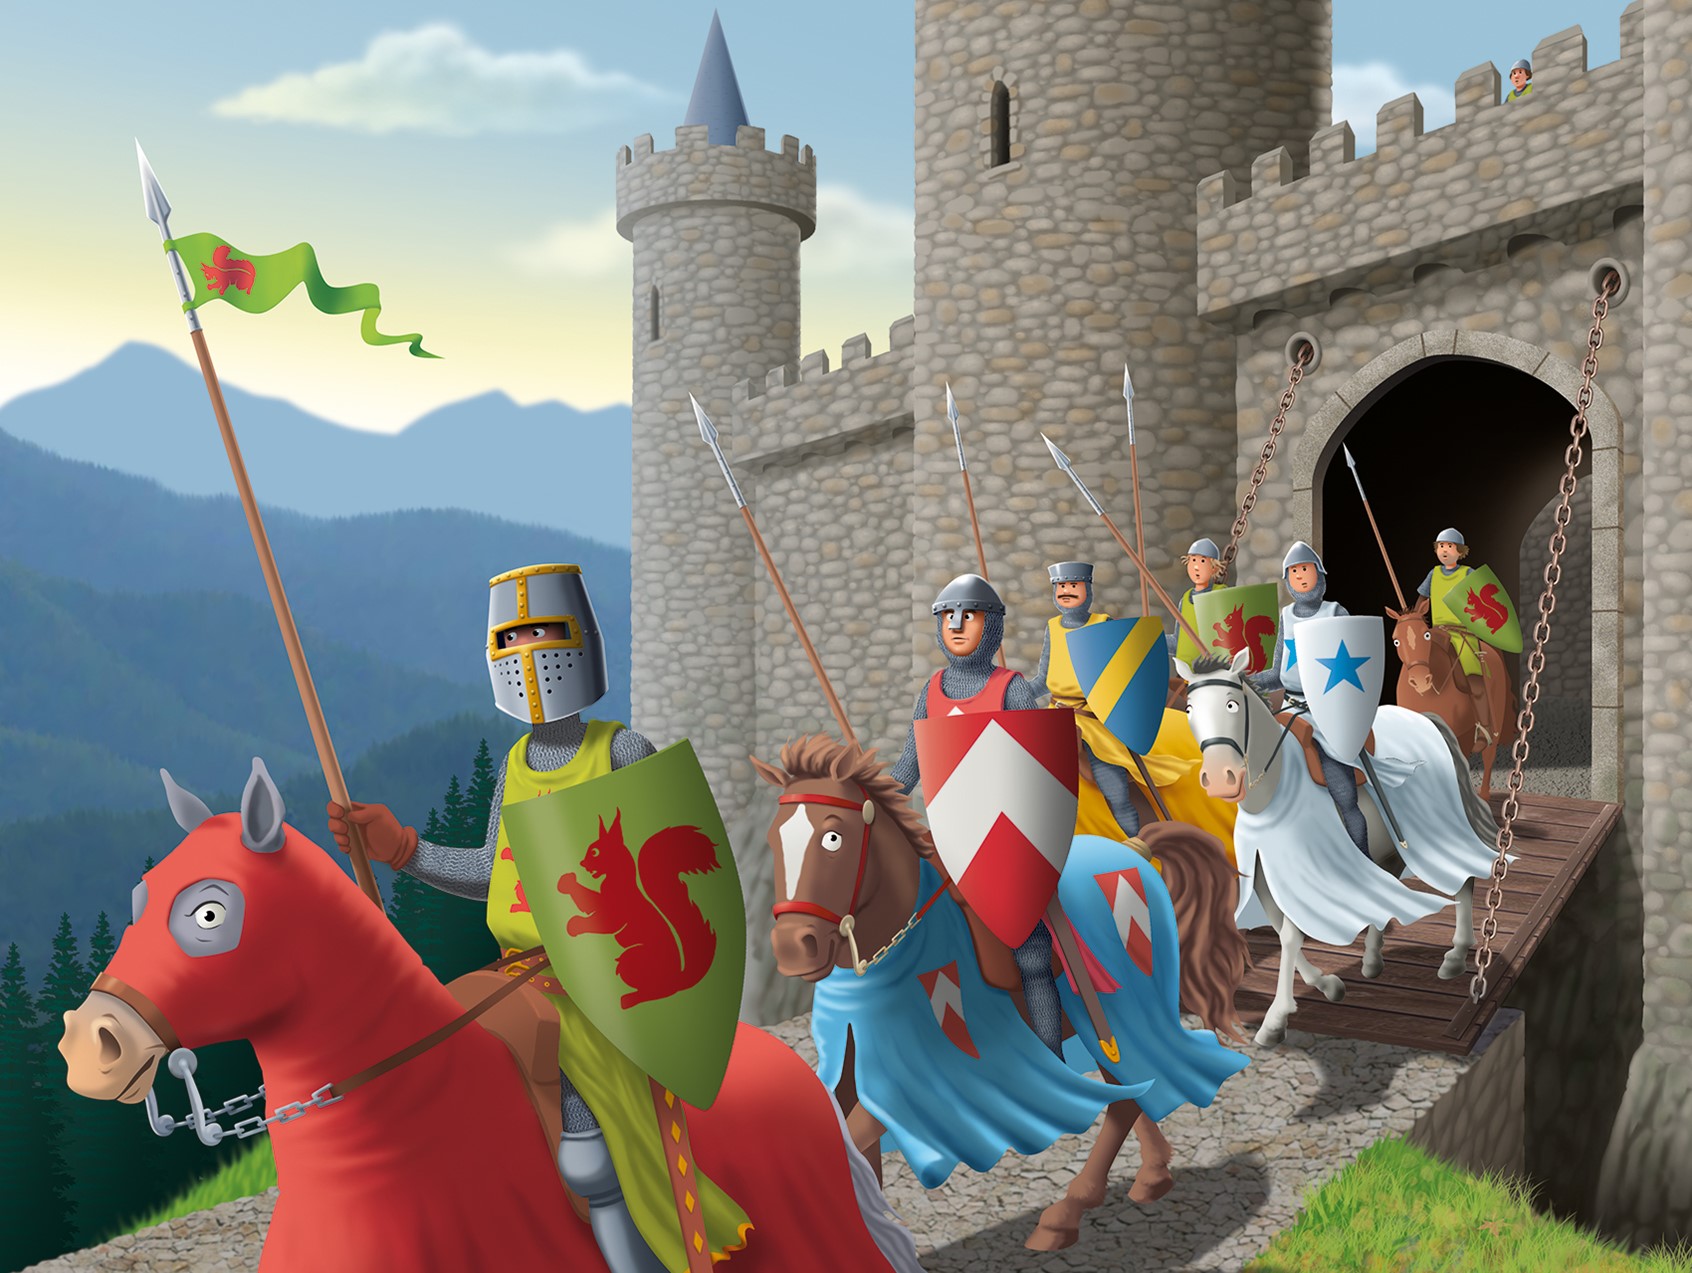 Robin Davies Illustration of Knights and Squires